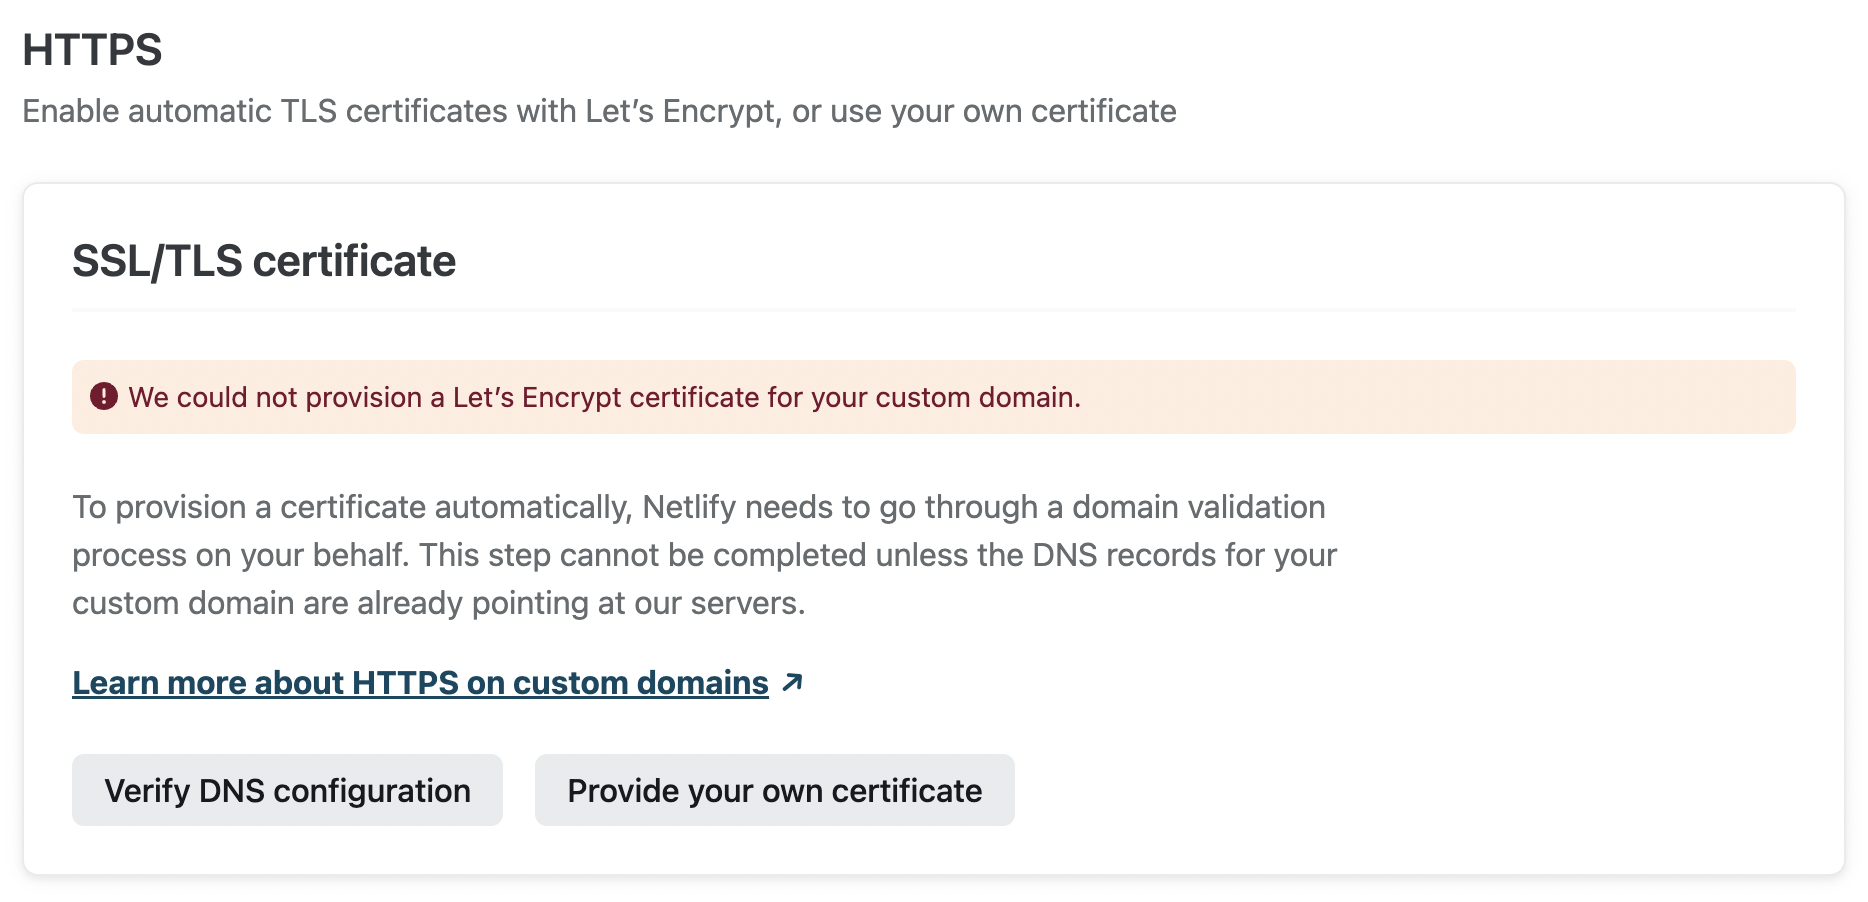 Verifying the domain for TLS in Netlify